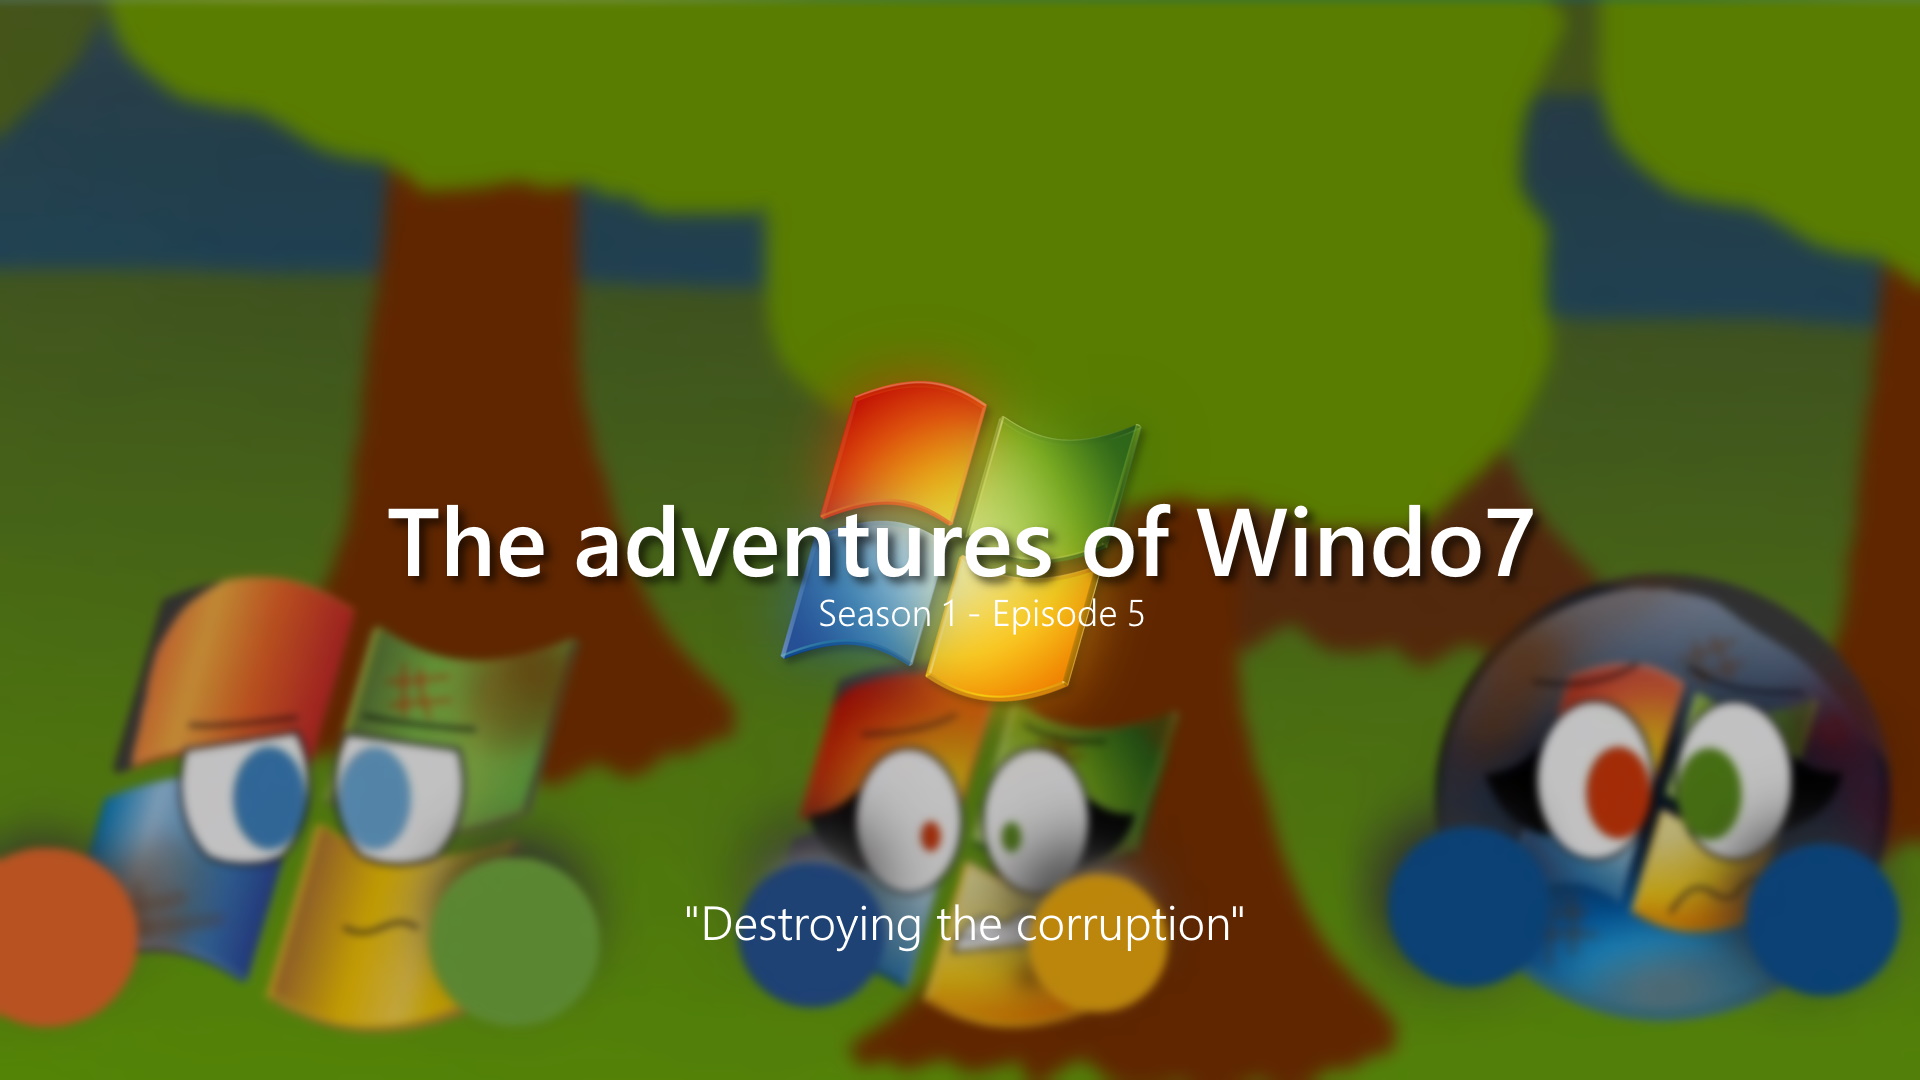 The Adventures Of Win 7 Season 1 Episode 5 Destroying the corruption